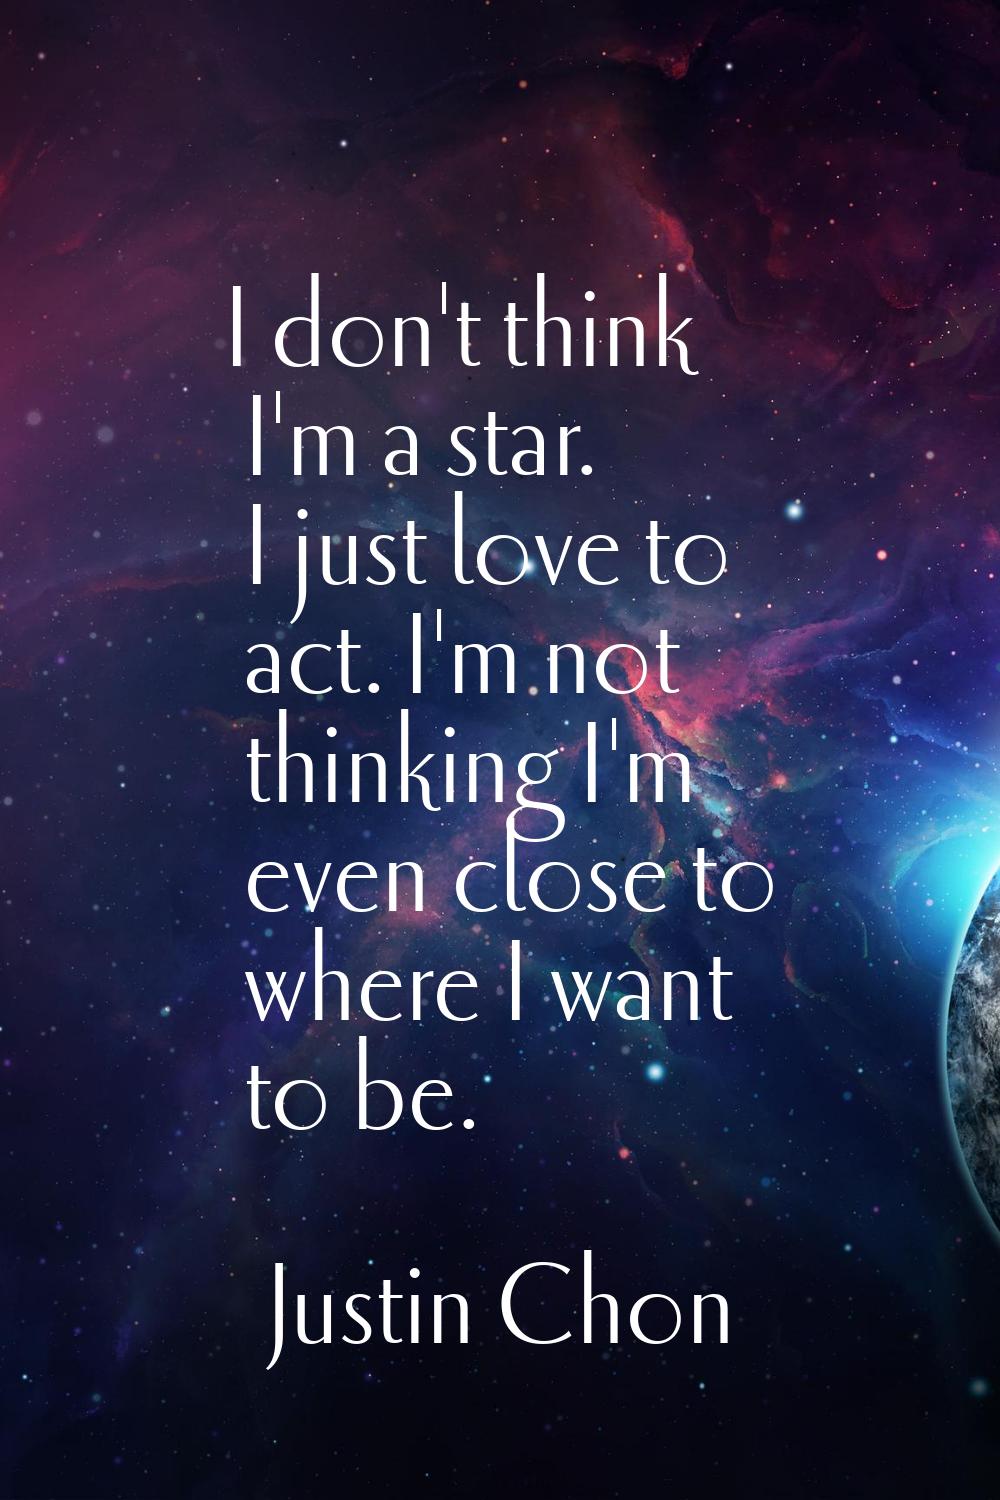 I don't think I'm a star. I just love to act. I'm not thinking I'm even close to where I want to be